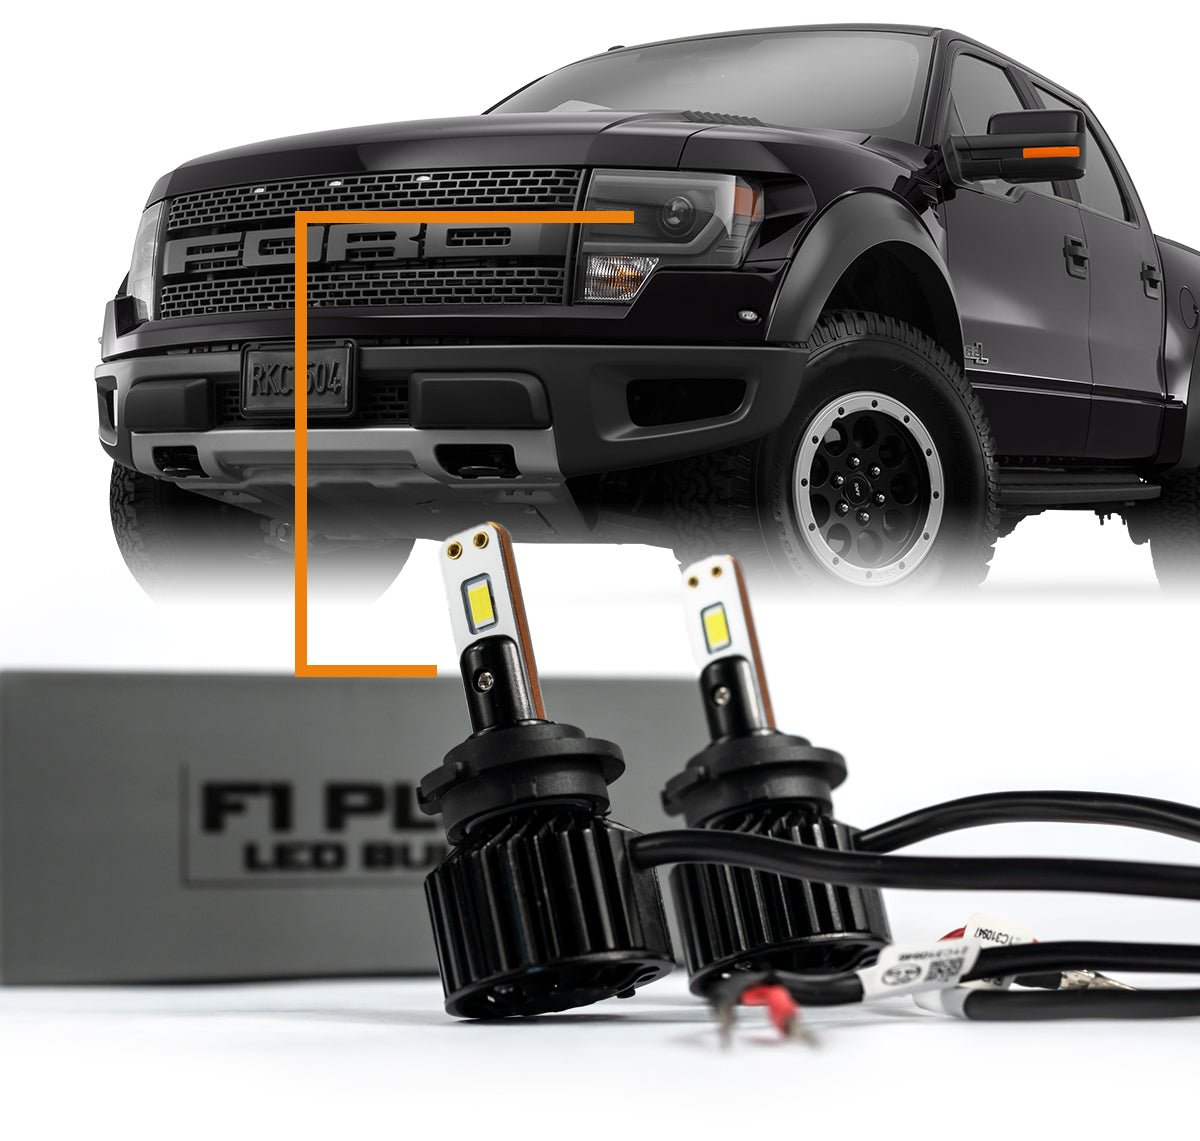 (Headlights - Factory Projector Style) 2010-2014 Raptor High/Low F1 PLUS Series HID to LED Conversion Set